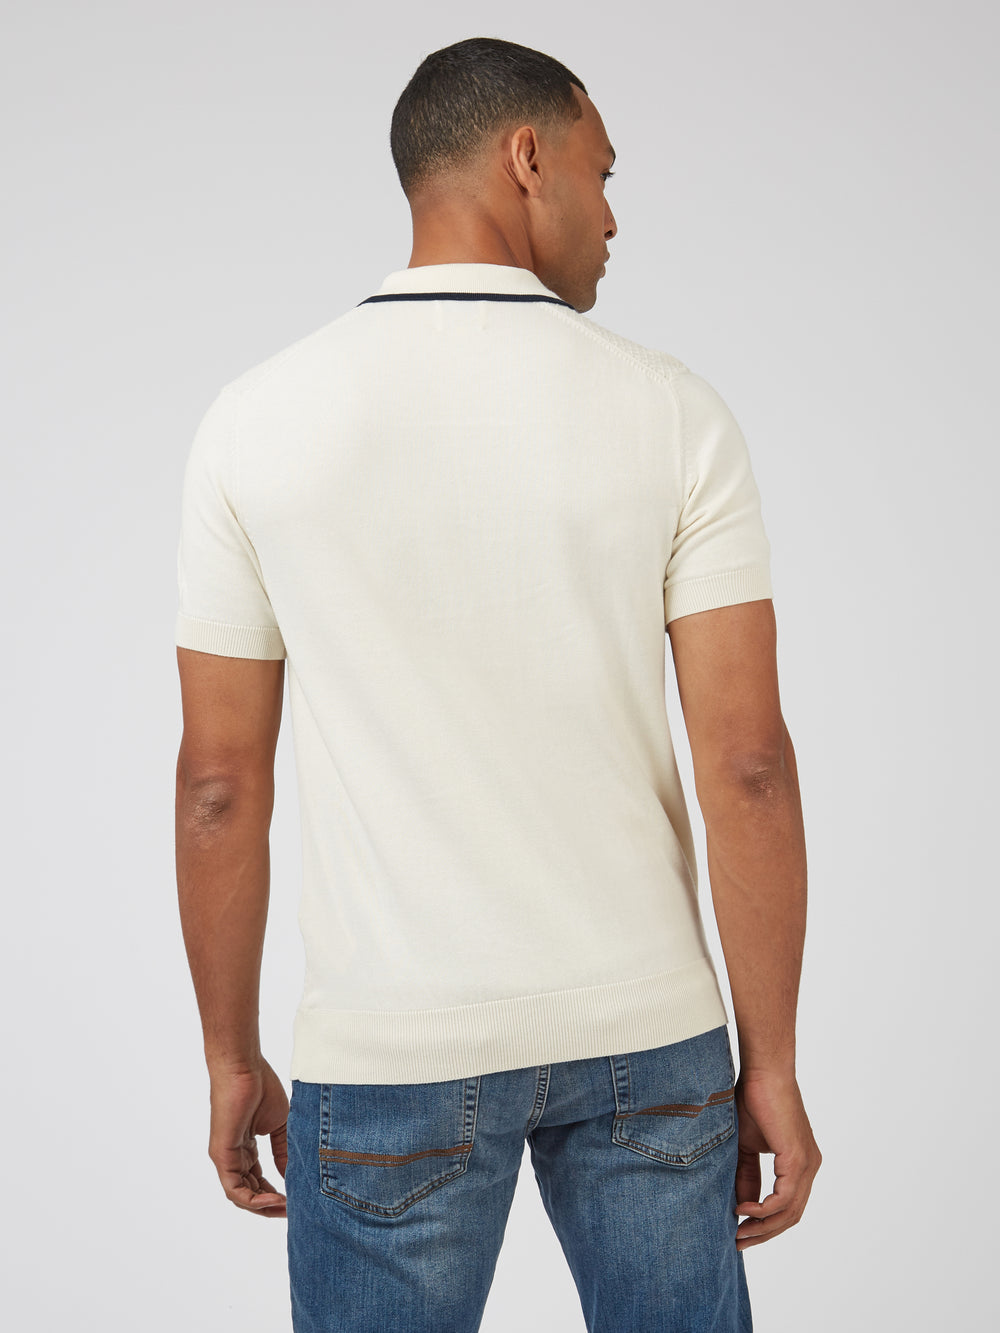 Textured Knit Contrast Tip Polo - Ivory